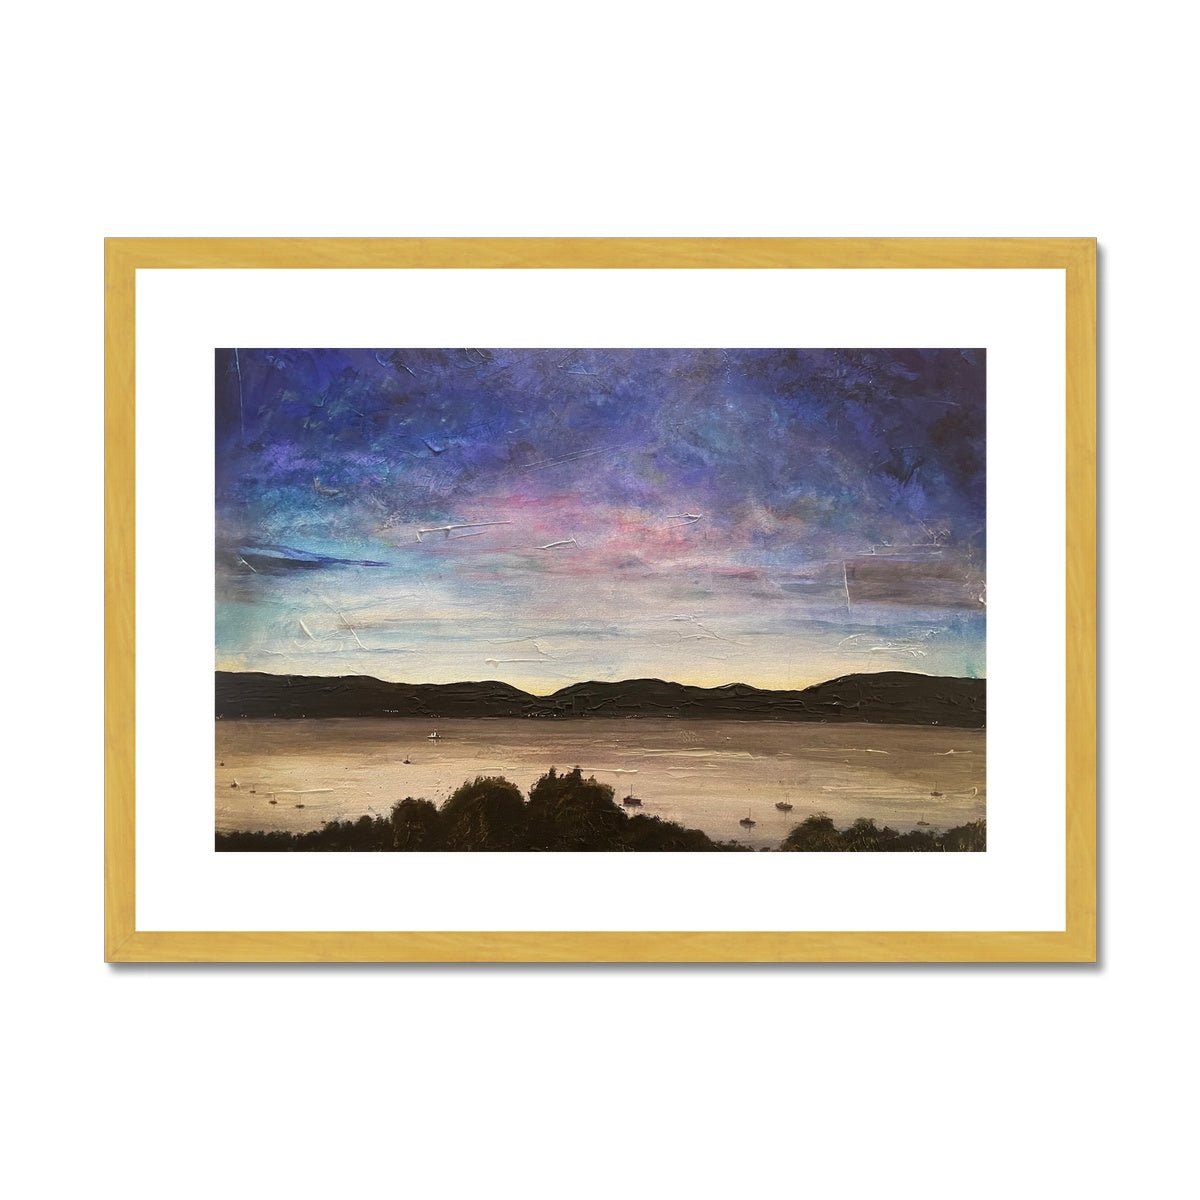 River Clyde Twilight Painting | Antique Framed & Mounted Prints From Scotland-Antique Framed & Mounted Prints-River Clyde Art Gallery-A2 Landscape-Gold Frame-Paintings, Prints, Homeware, Art Gifts From Scotland By Scottish Artist Kevin Hunter